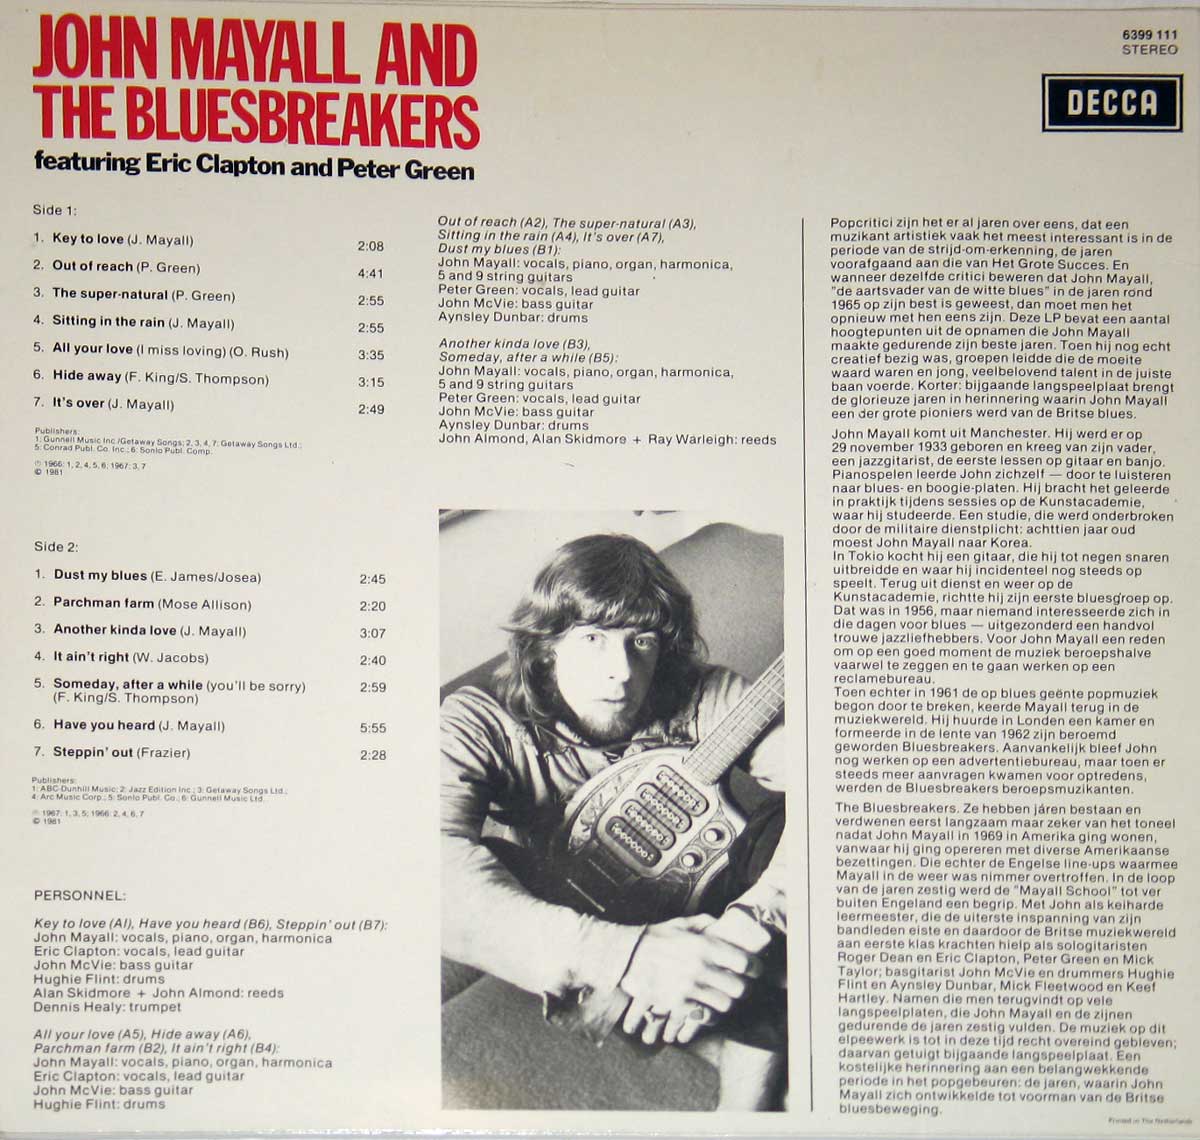 Photo of album back cover John Mayall & The Bluesbreakers Featuring Eric Clapton & Peter Green 